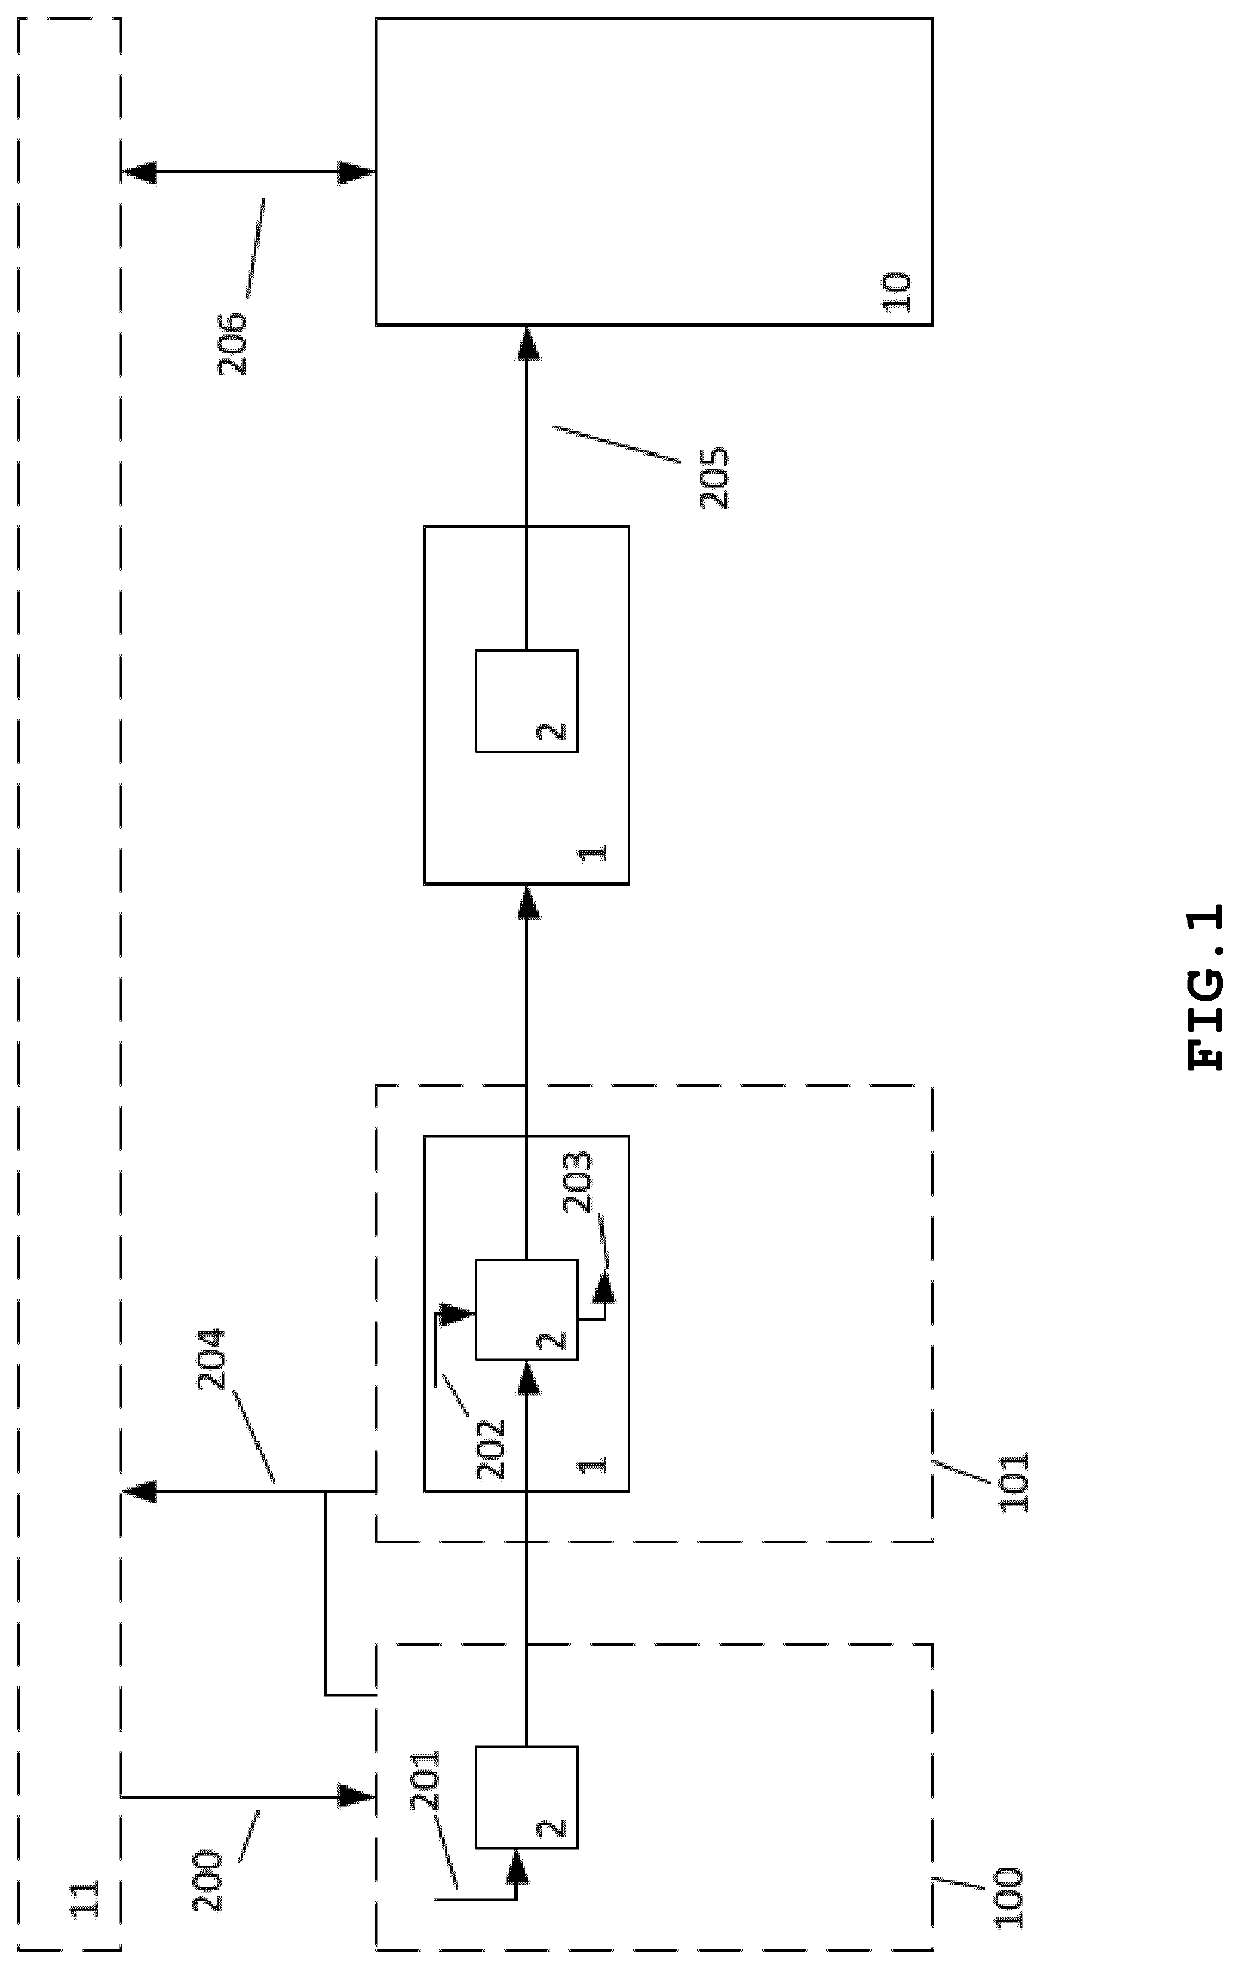 Device authentication with sealing and verification